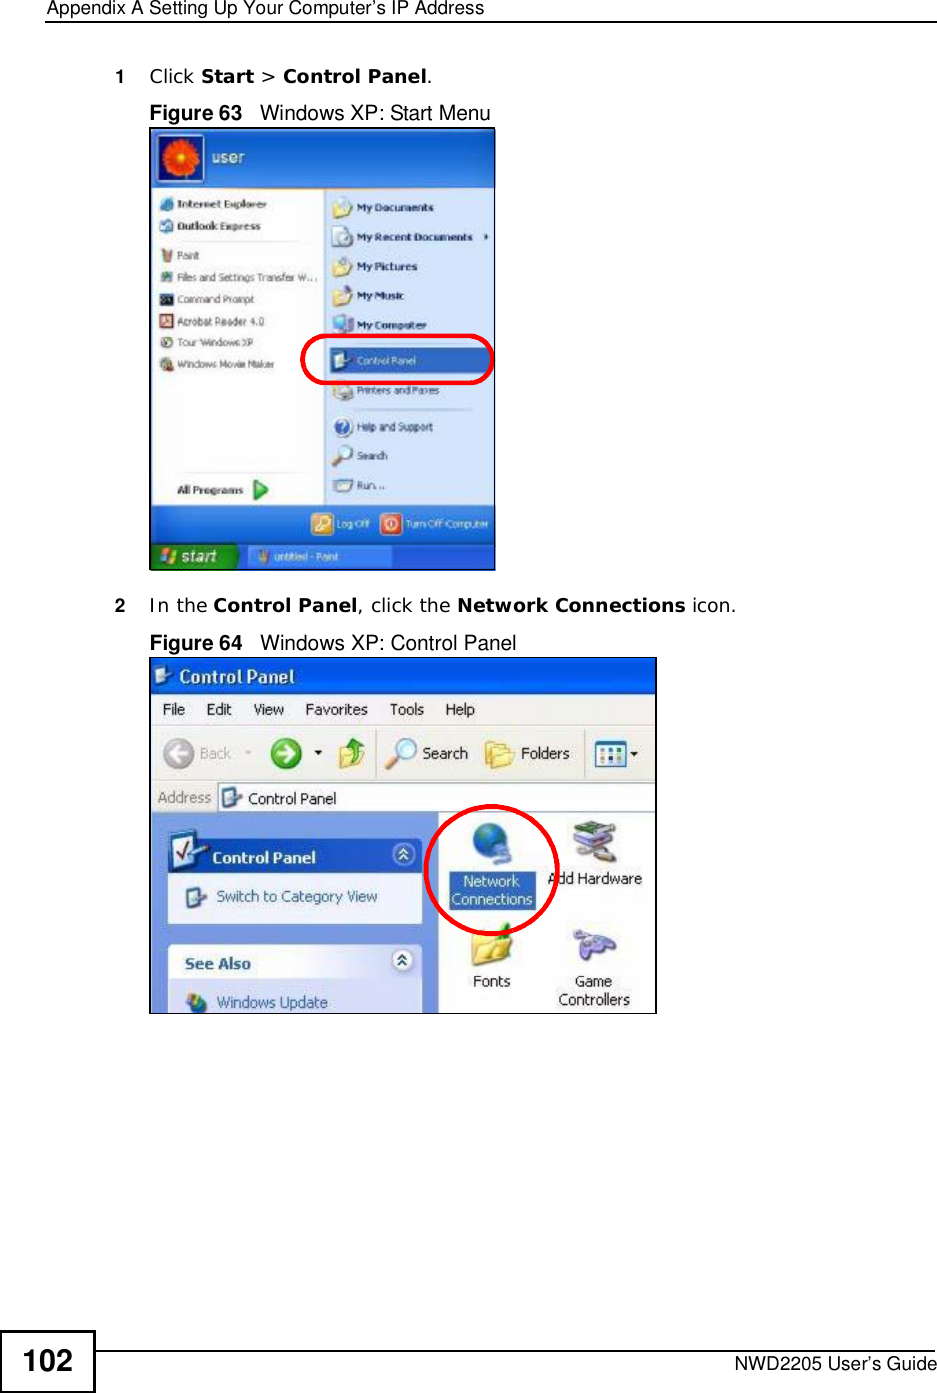 Appendix ASetting Up Your Computer’s IP AddressNWD2205 User’s Guide1021Click Start &gt;Control Panel.Figure 63   Windows XP: Start Menu2In the Control Panel, click the Network Connections icon.Figure 64   Windows XP: Control Panel